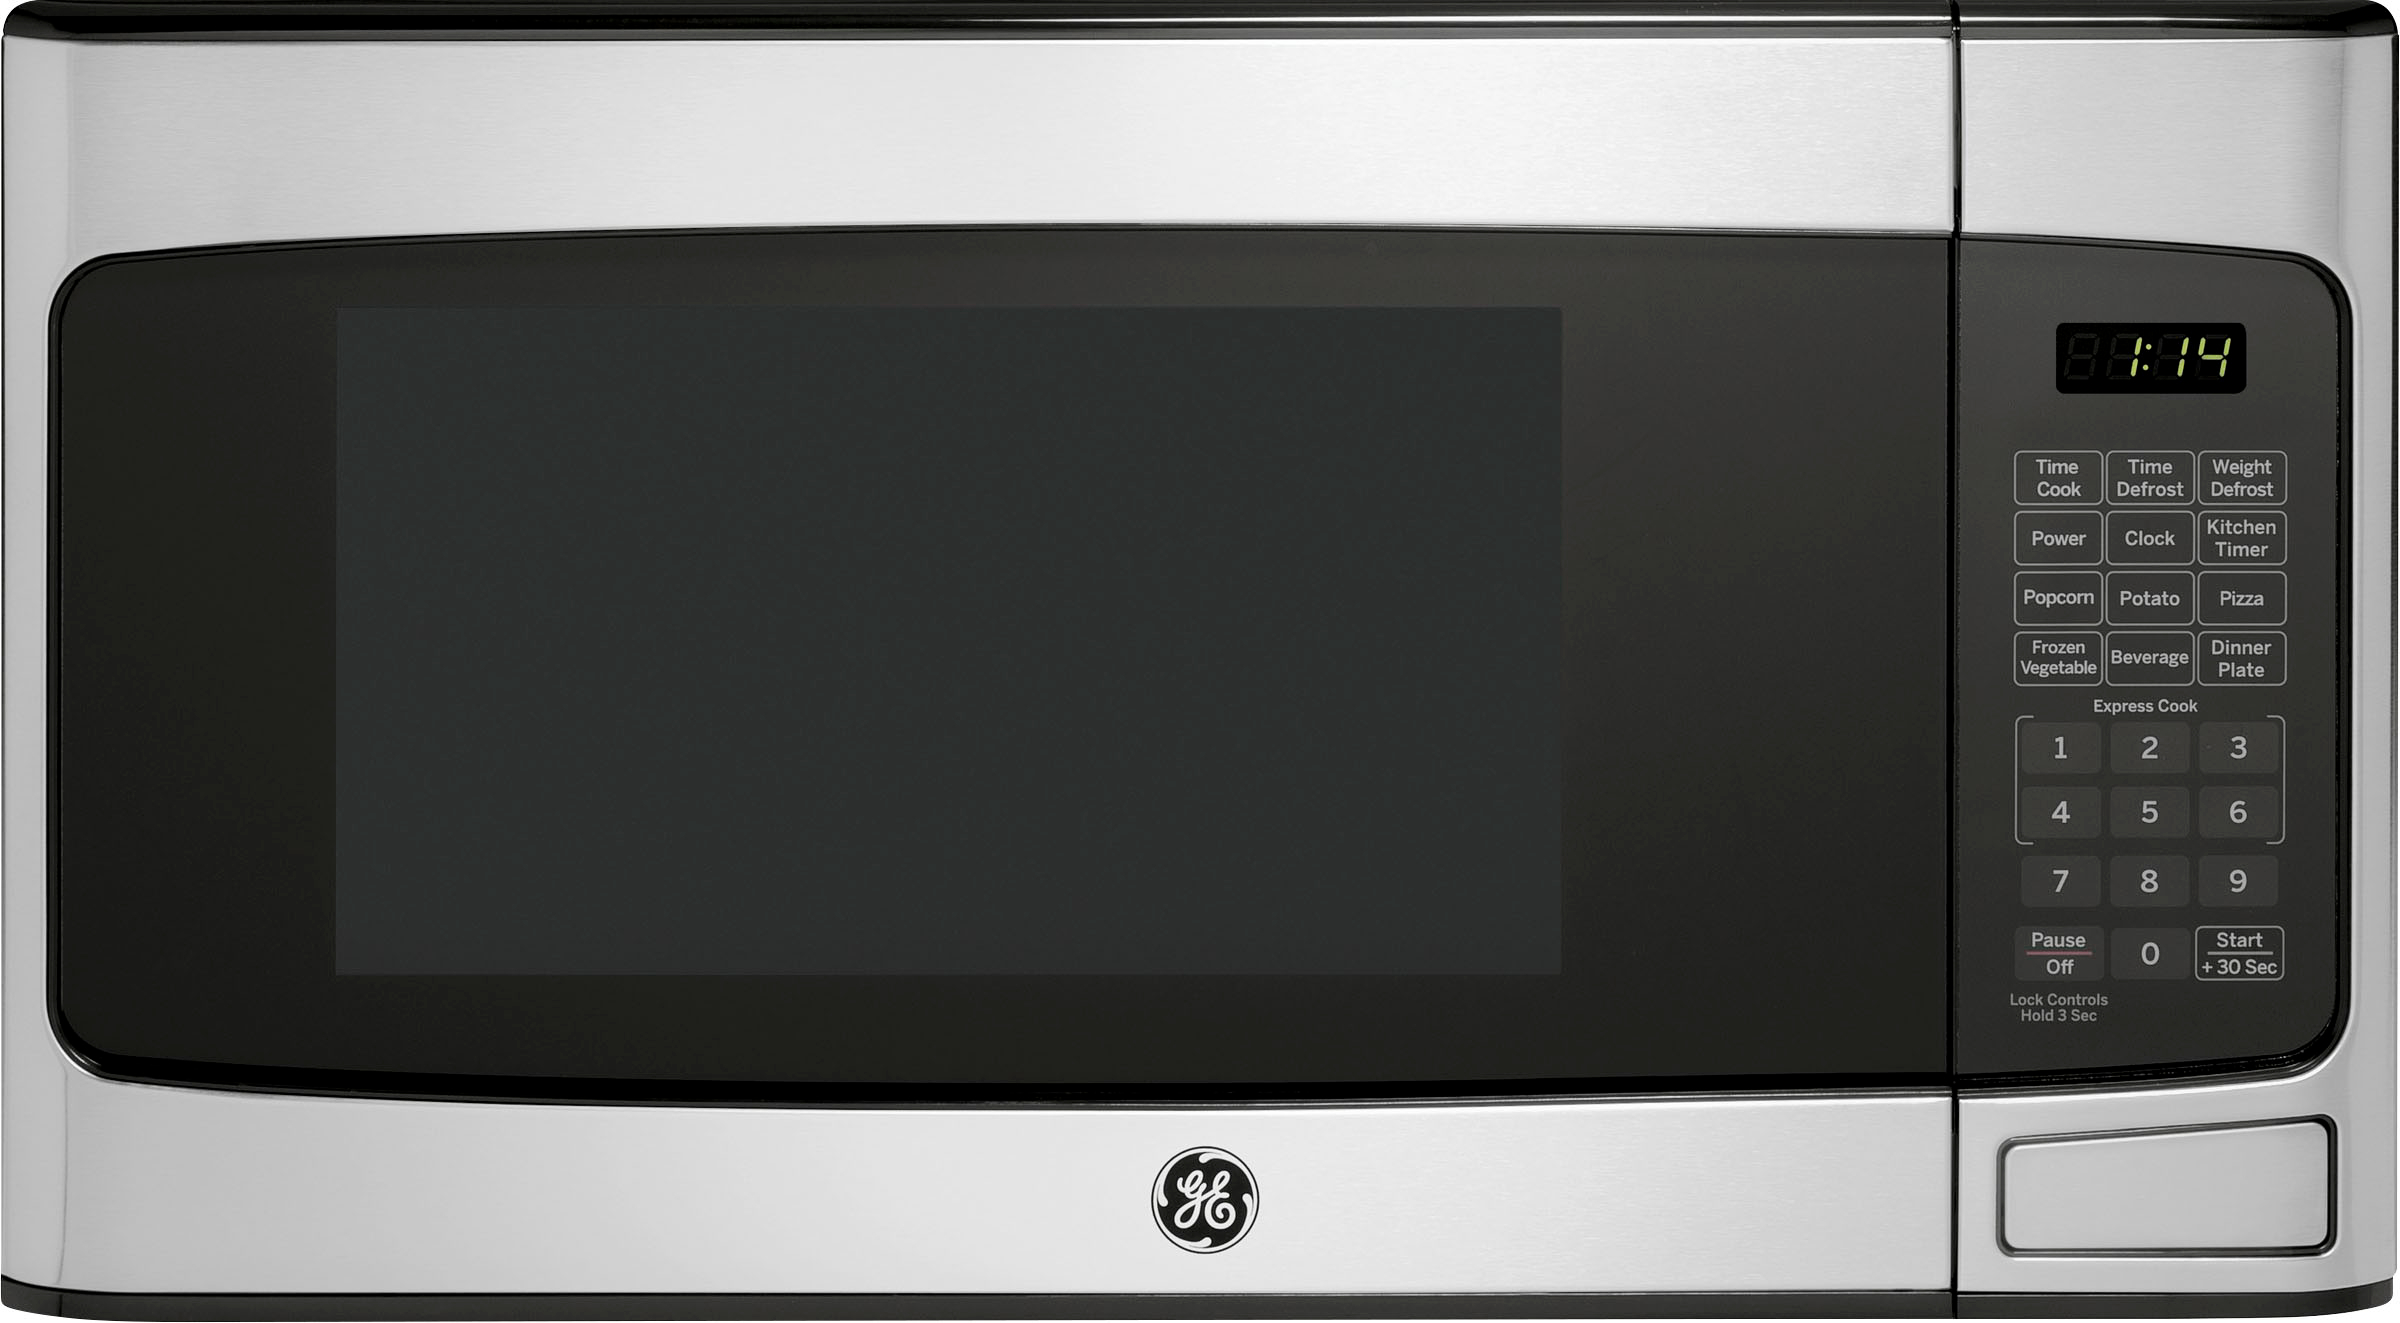 GE - 1.1 Cu. Ft. Mid-Size Microwave with Included Pasta/Veggie Cooker - Stainless Steel